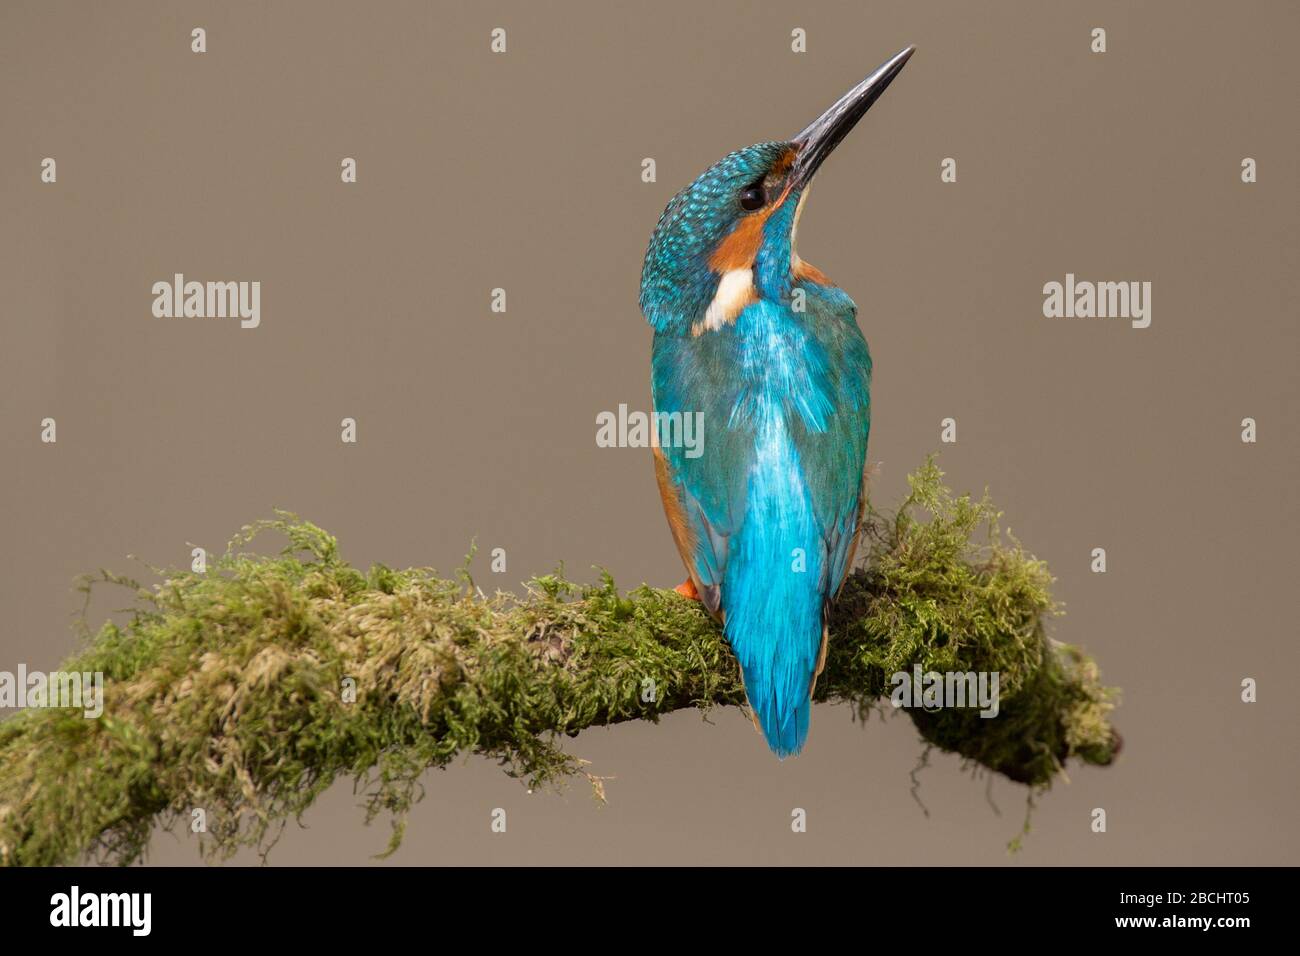 European Kingfisher ( Alcedo Atthis ) perched showing its bright blur colours and long beak with a blurred background Stock Photo